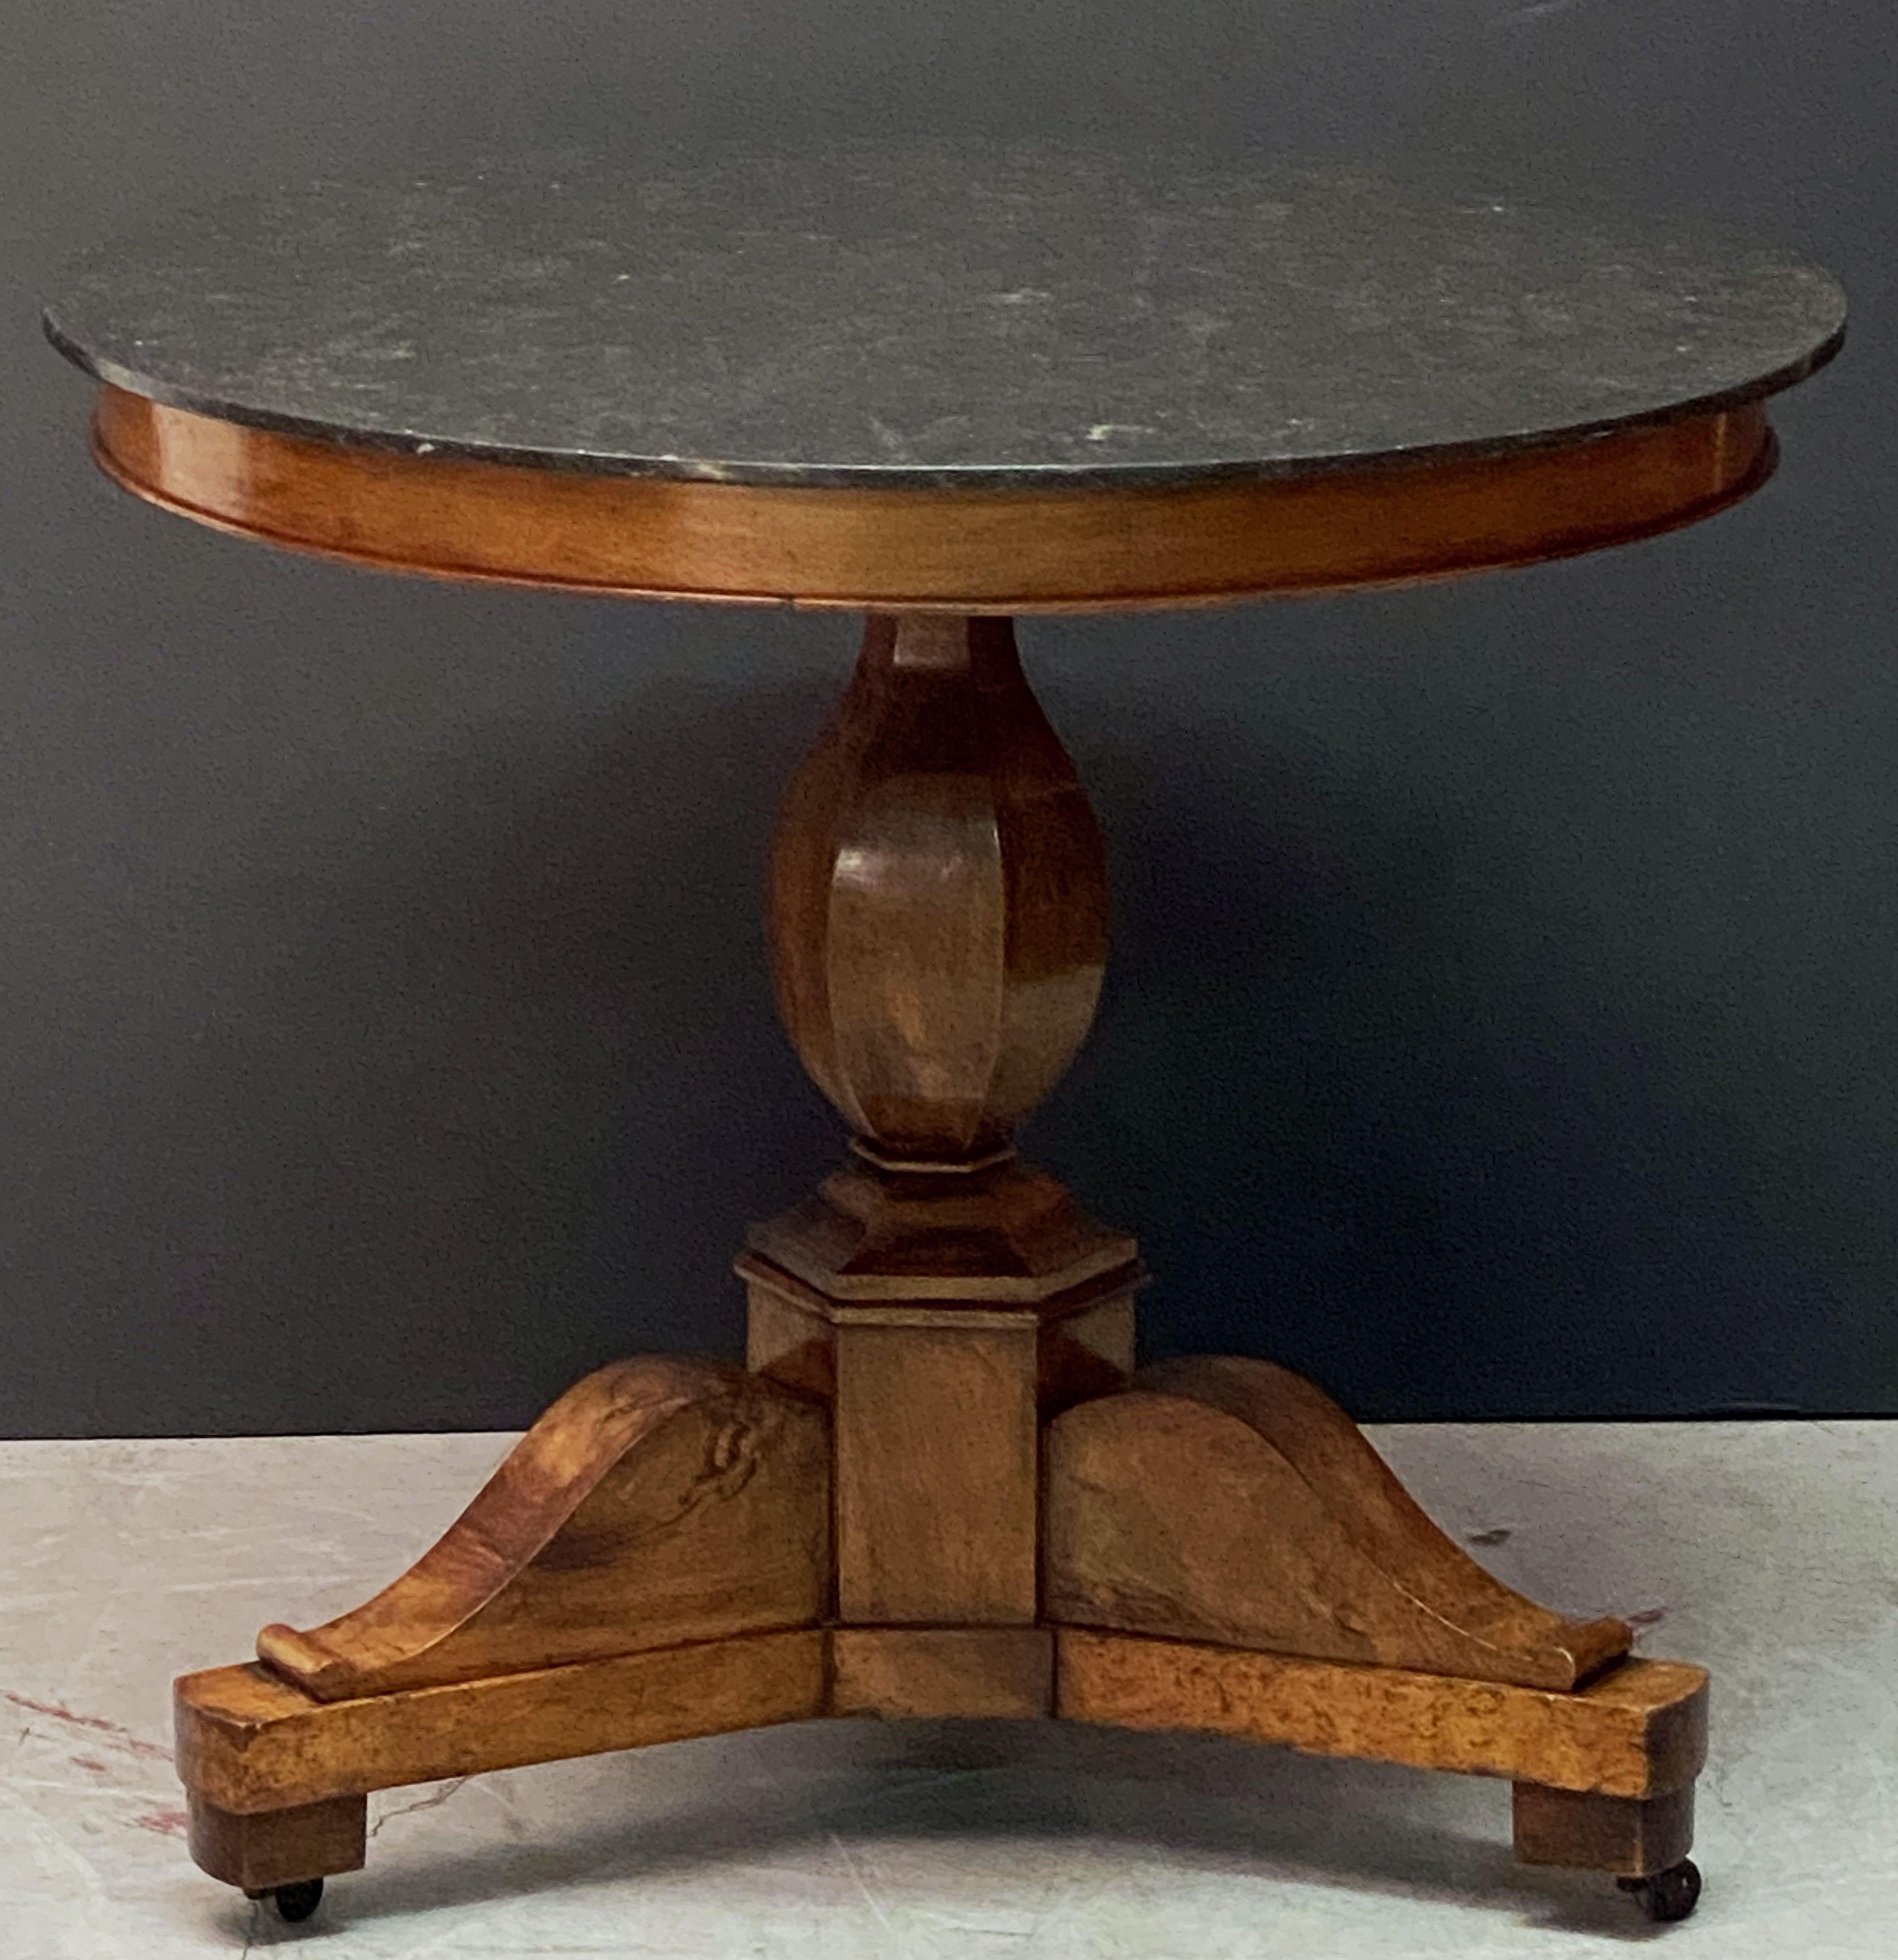 19th Century French Guéridon or Round Table of Walnut with Marble Top